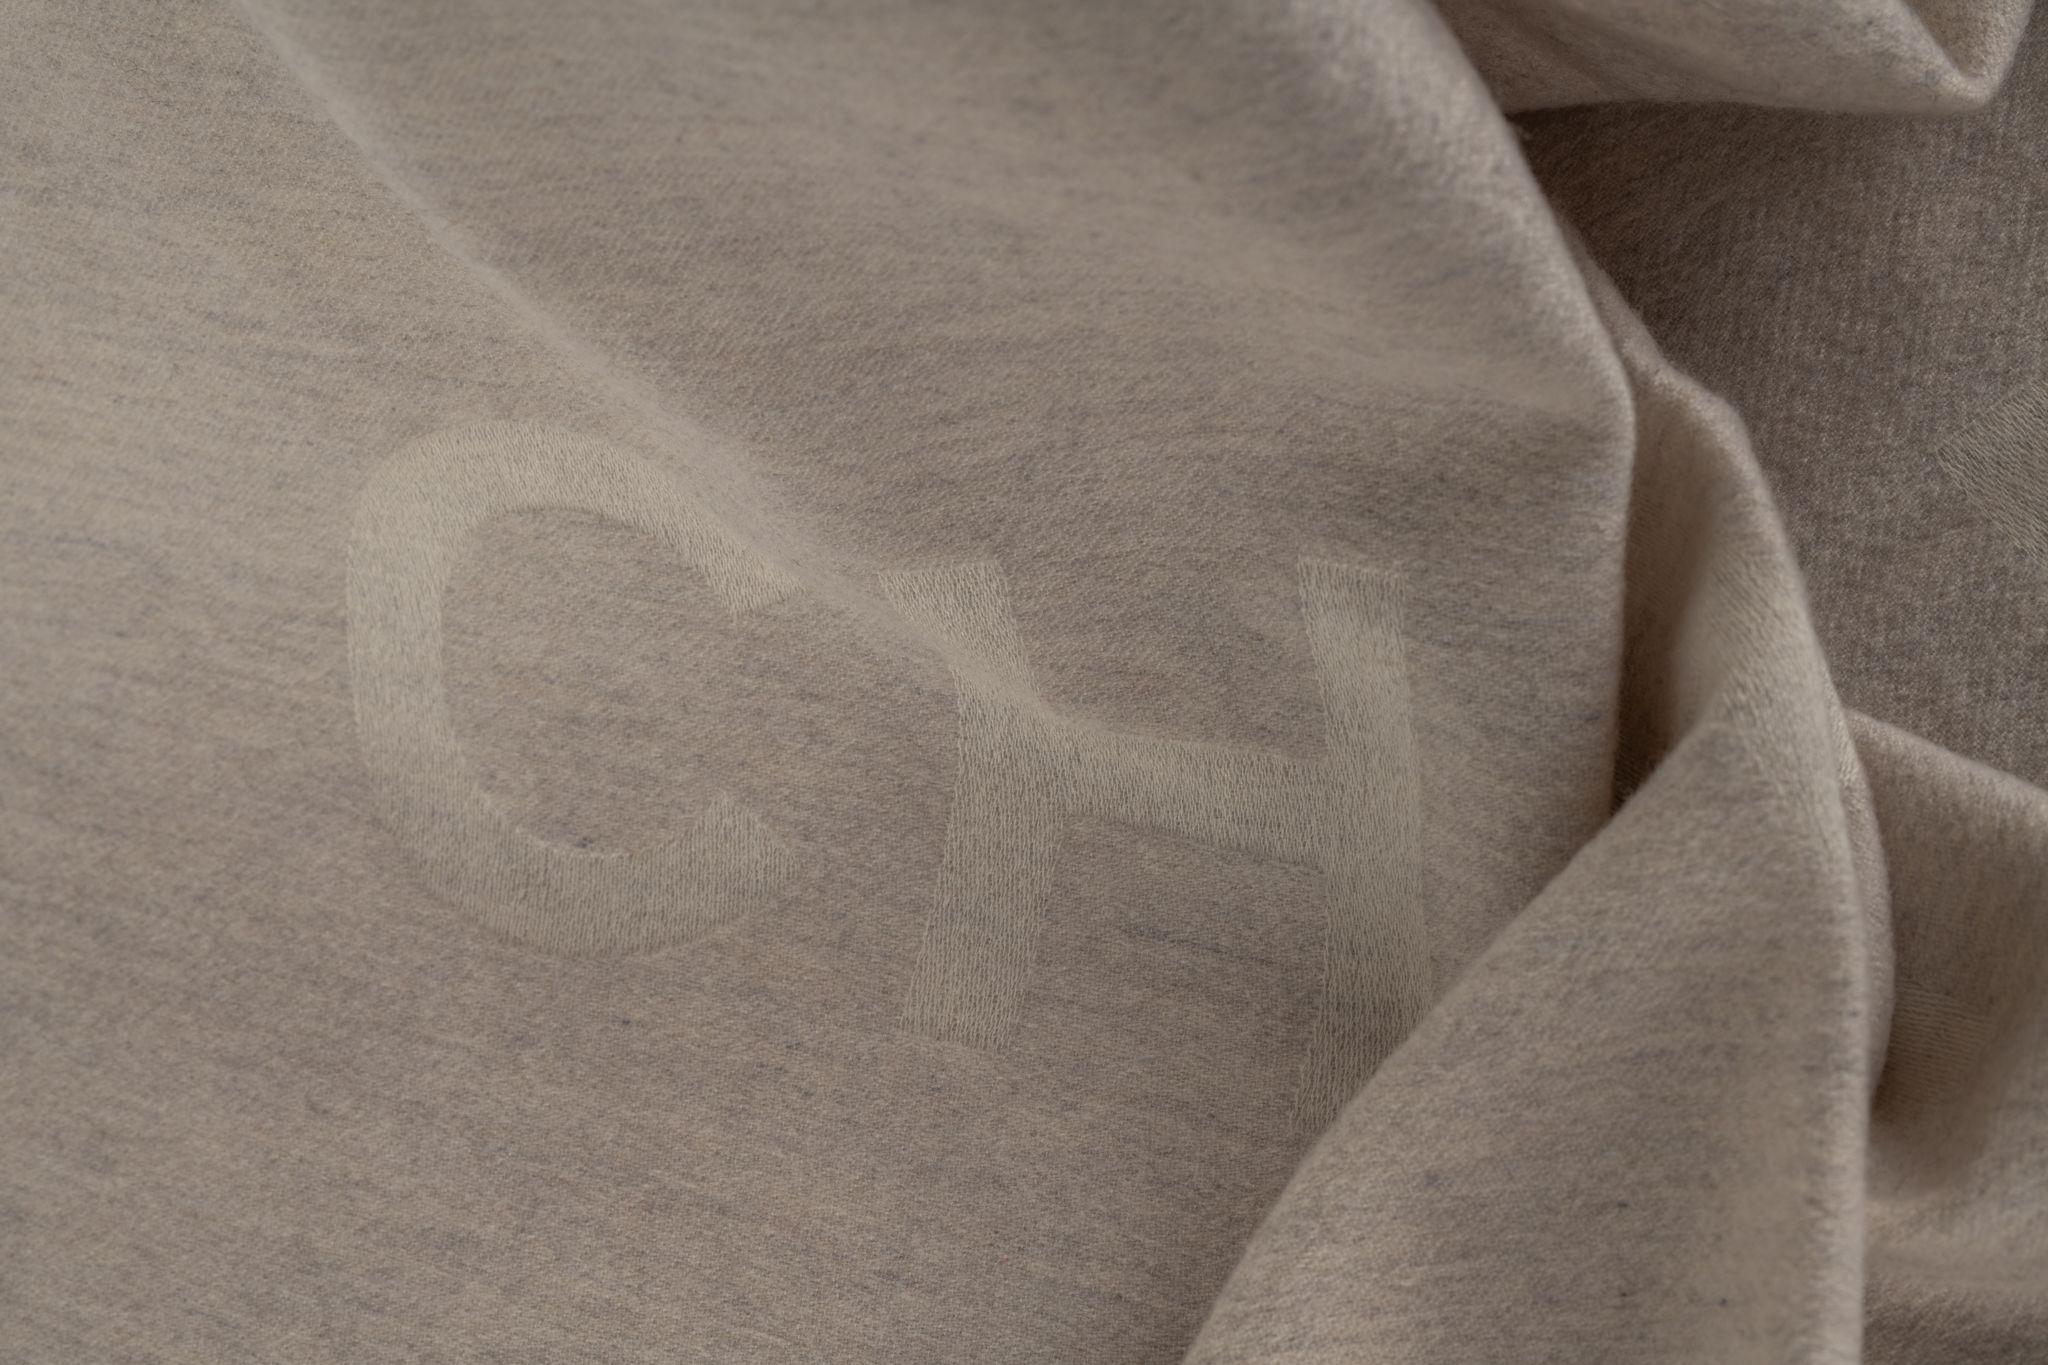 Chanel creme cashmere shawl with Chanel written on it. The scarf is in excellent condition.